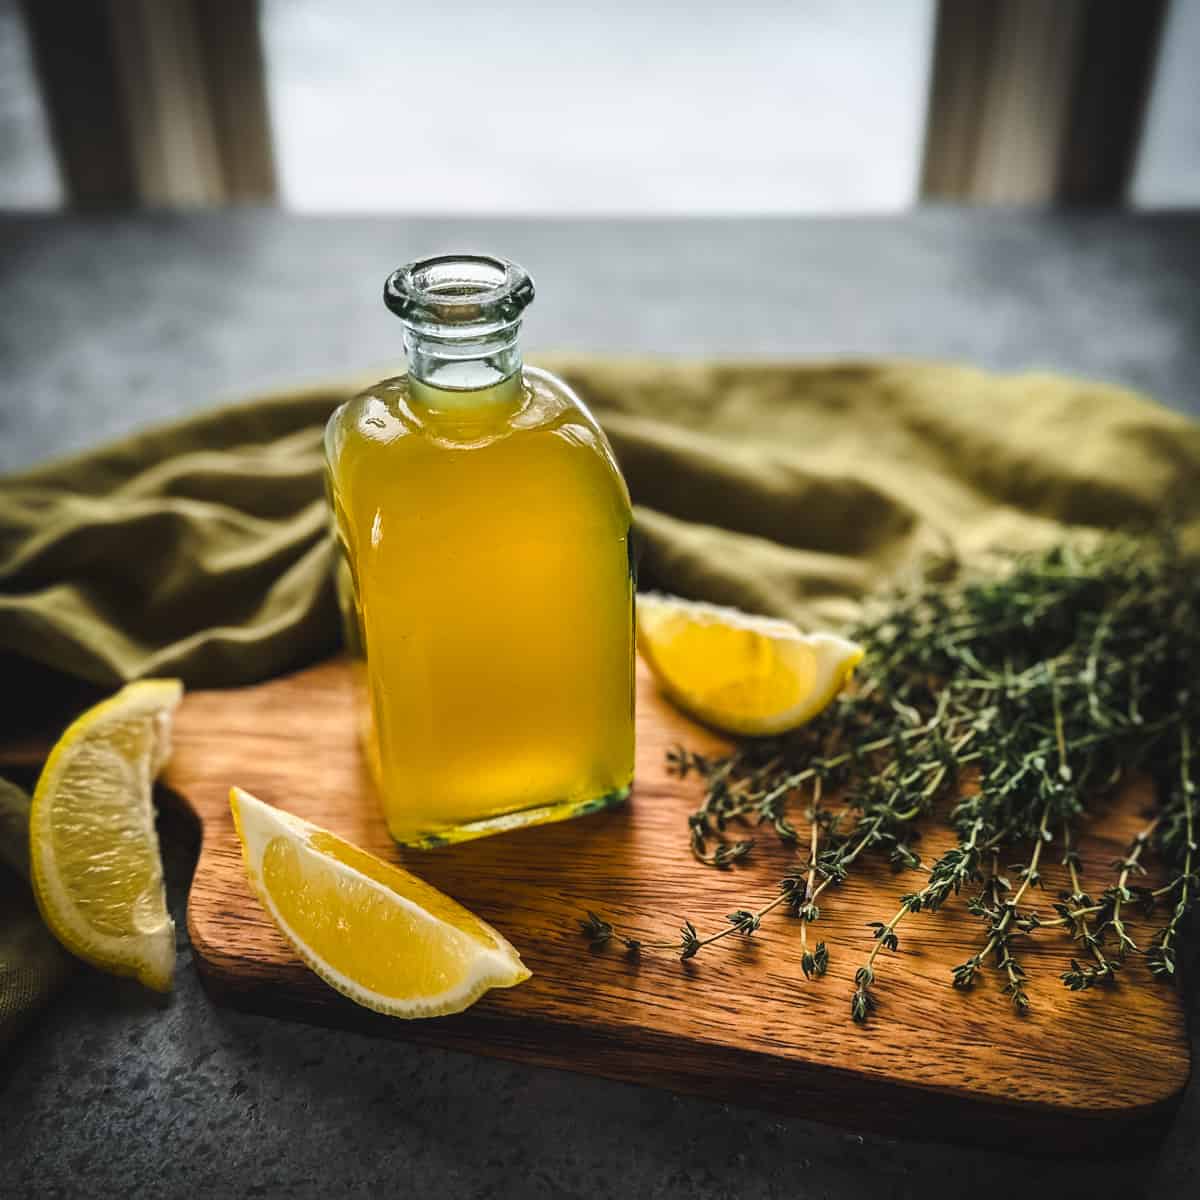 A bottle of golden colored thyme cough syrup on a wood cutting board, surrounded by lemon wedges, fresh thyme sprigs, and an olive green cloth. 